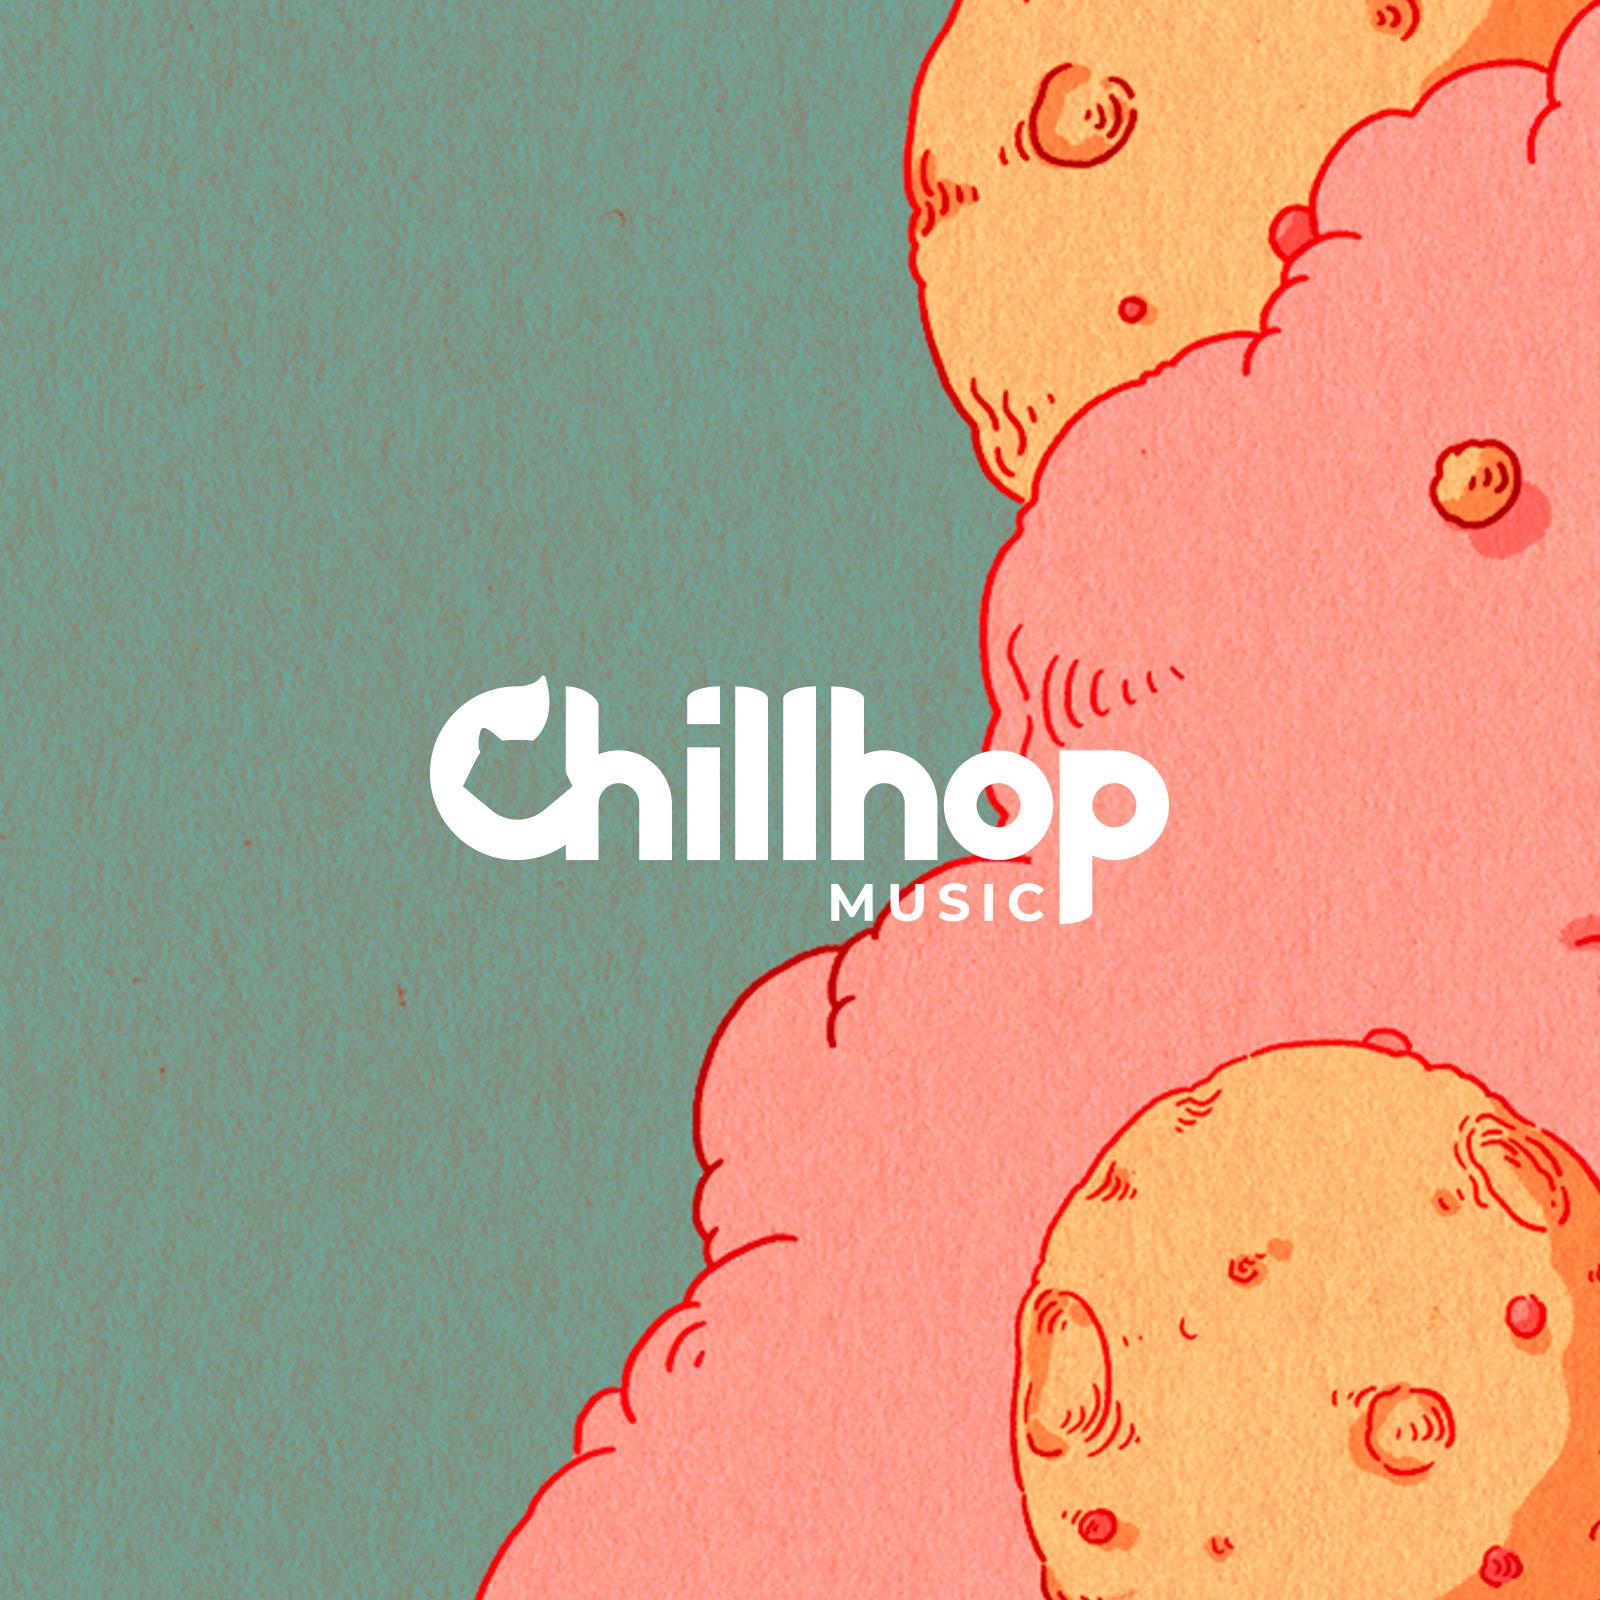 Chillhop Music hip hop and chill beats